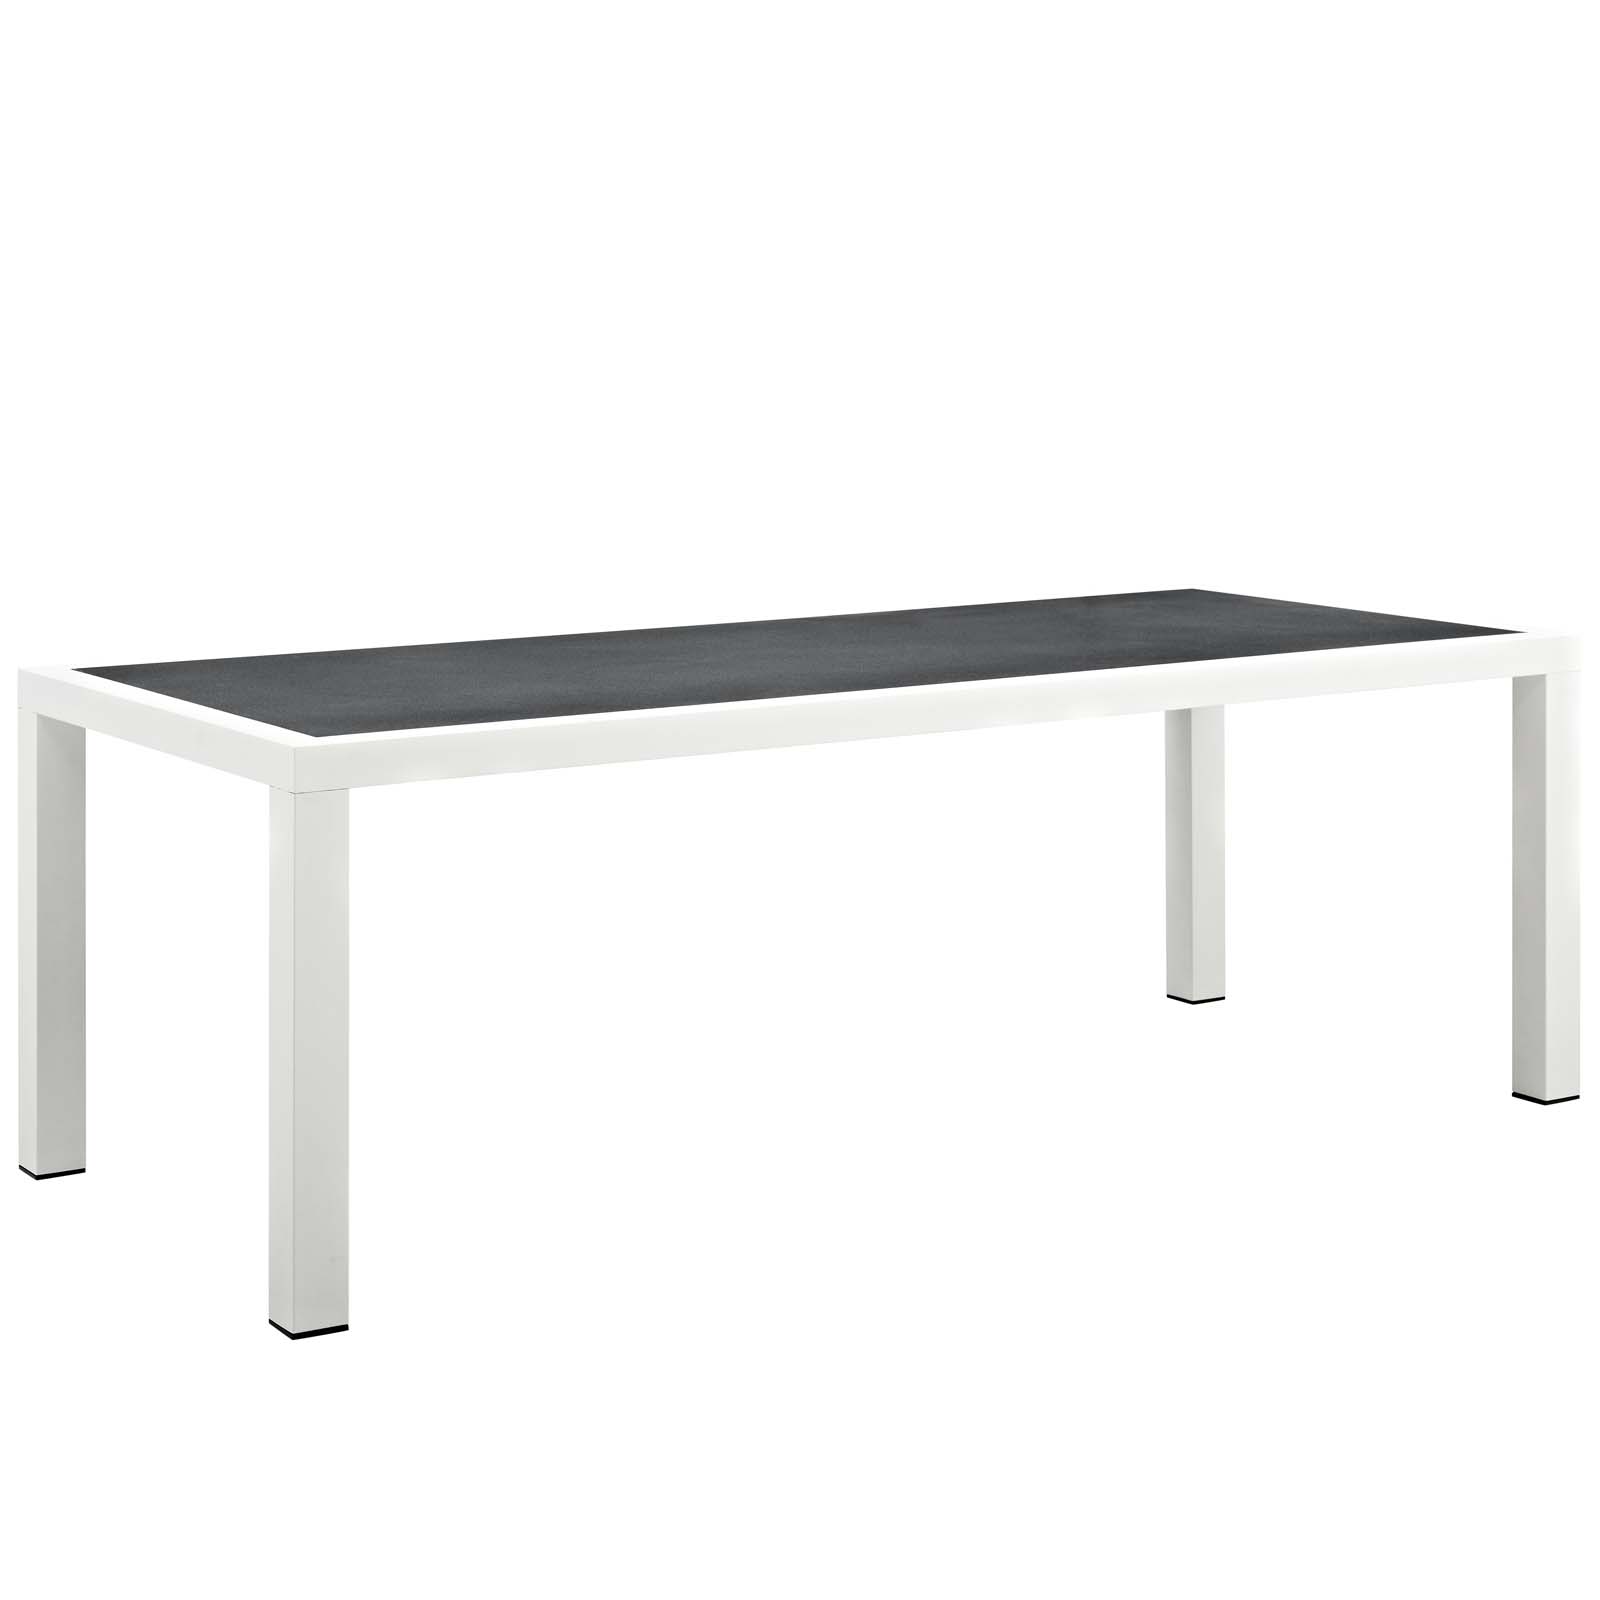 Modway Stance 90.5" Outdoor Patio Aluminum Dining Table in White Gray - image 2 of 6